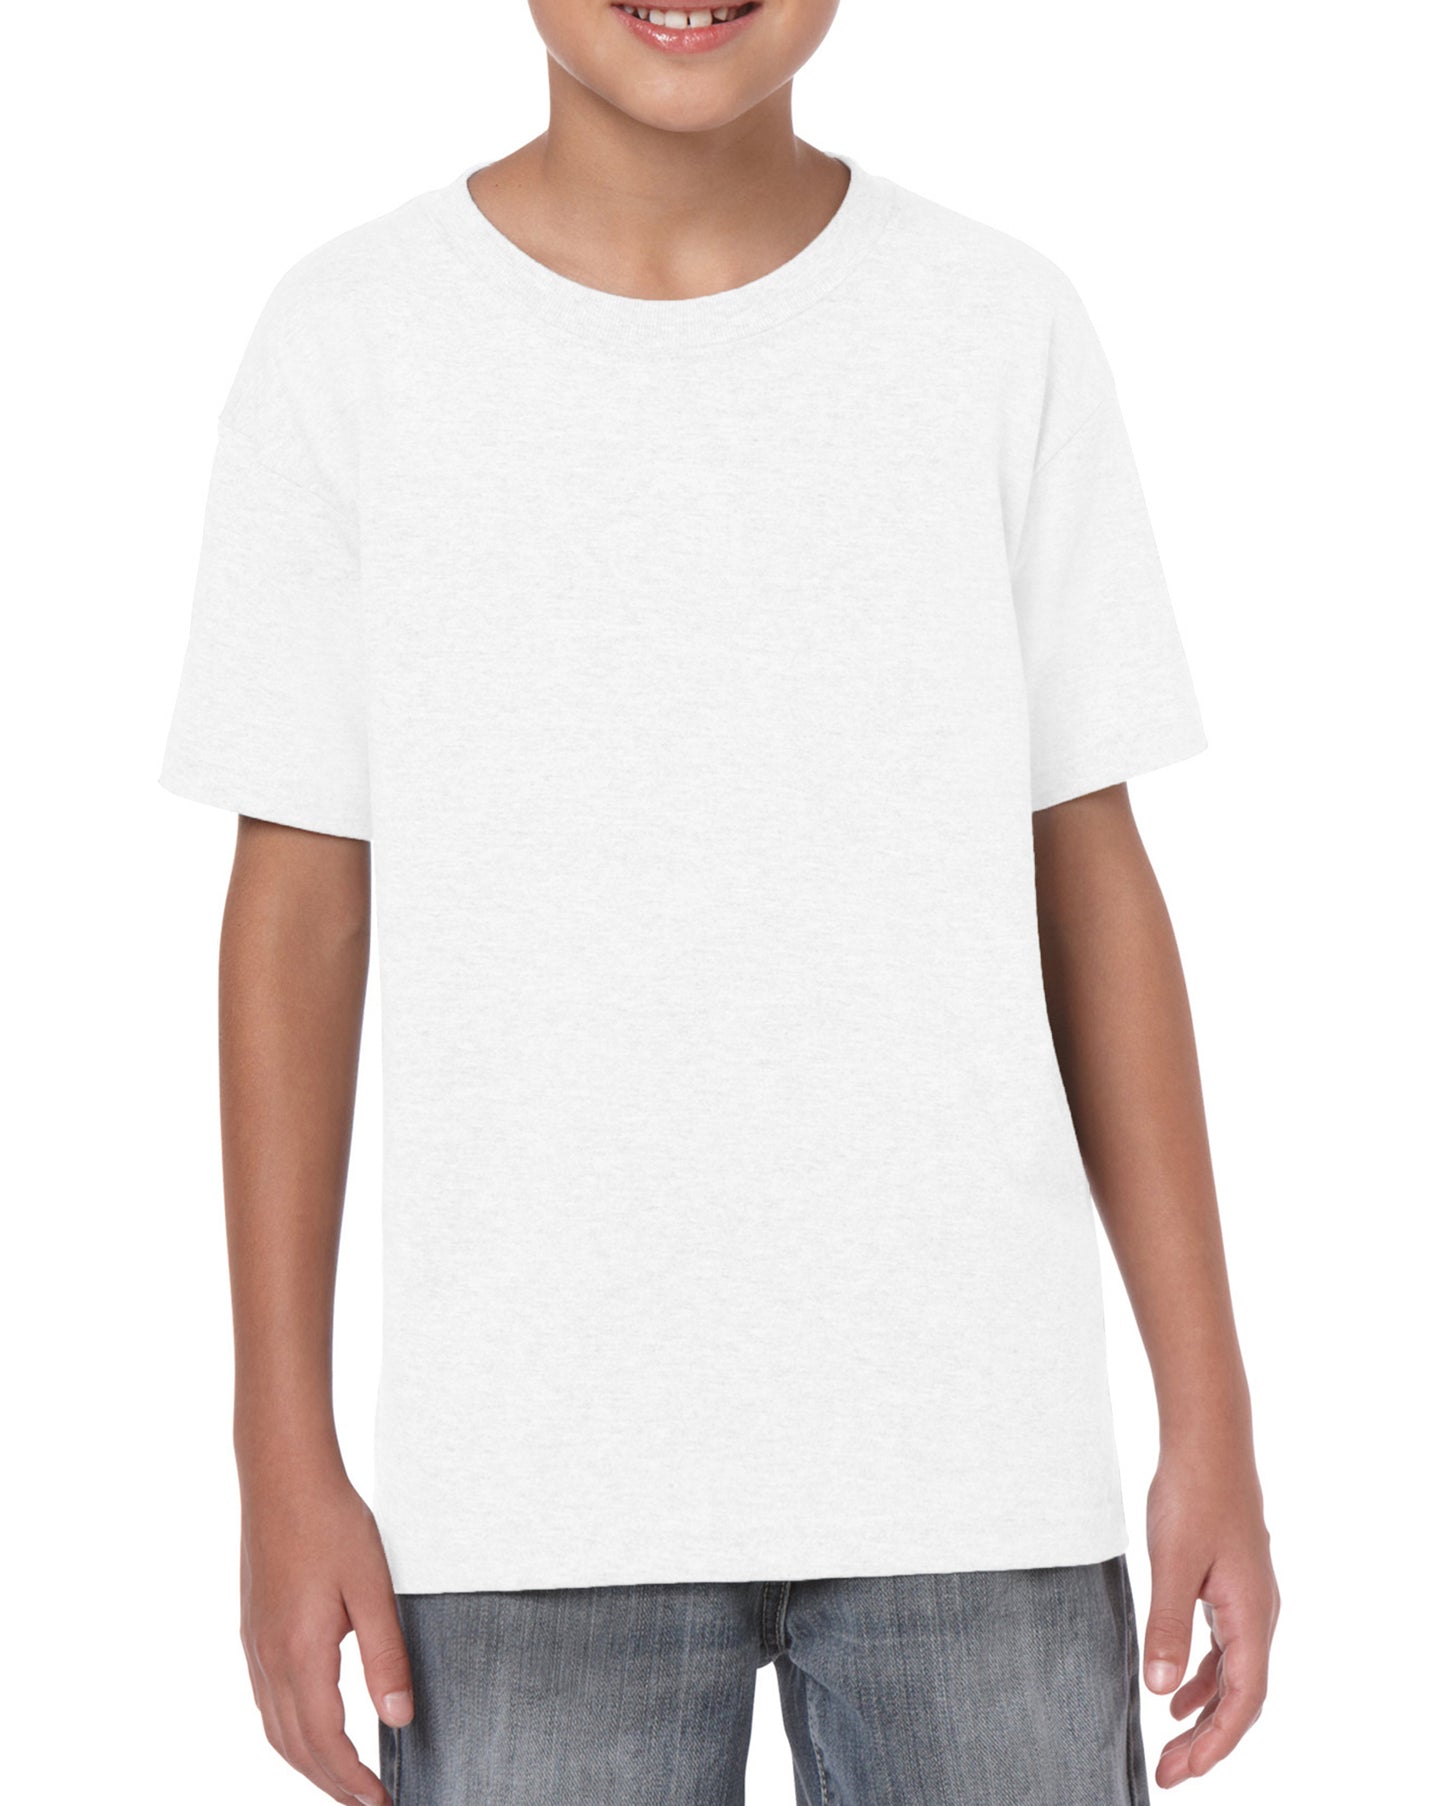 Youth Softstyle s/s T-Shirt